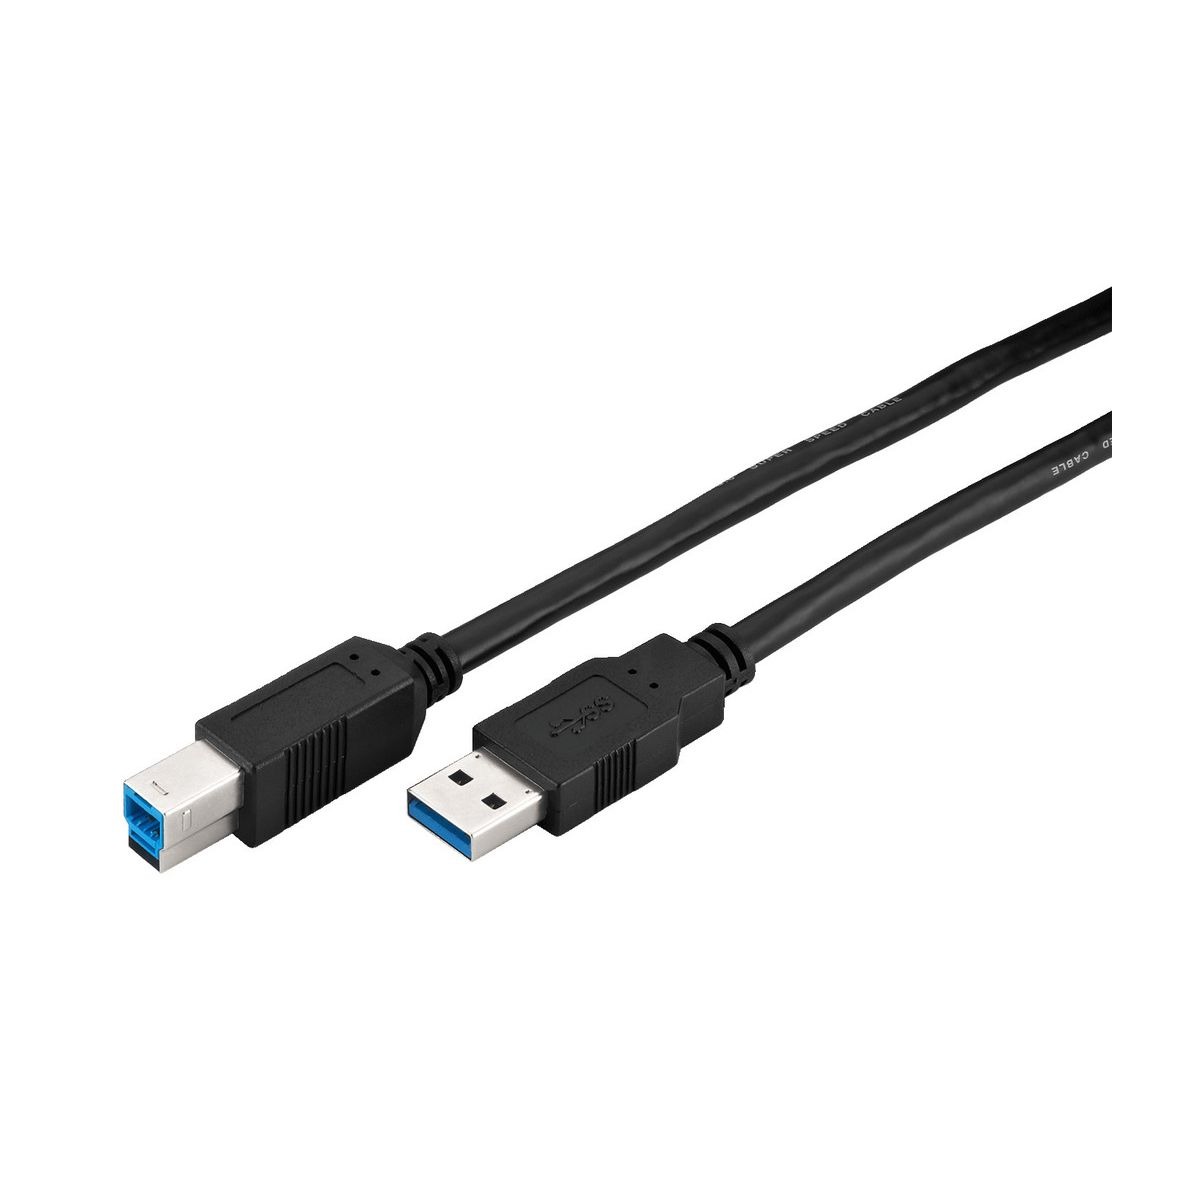 USB-302AB | USB 3.0 connnection cable, 1.8 m-0